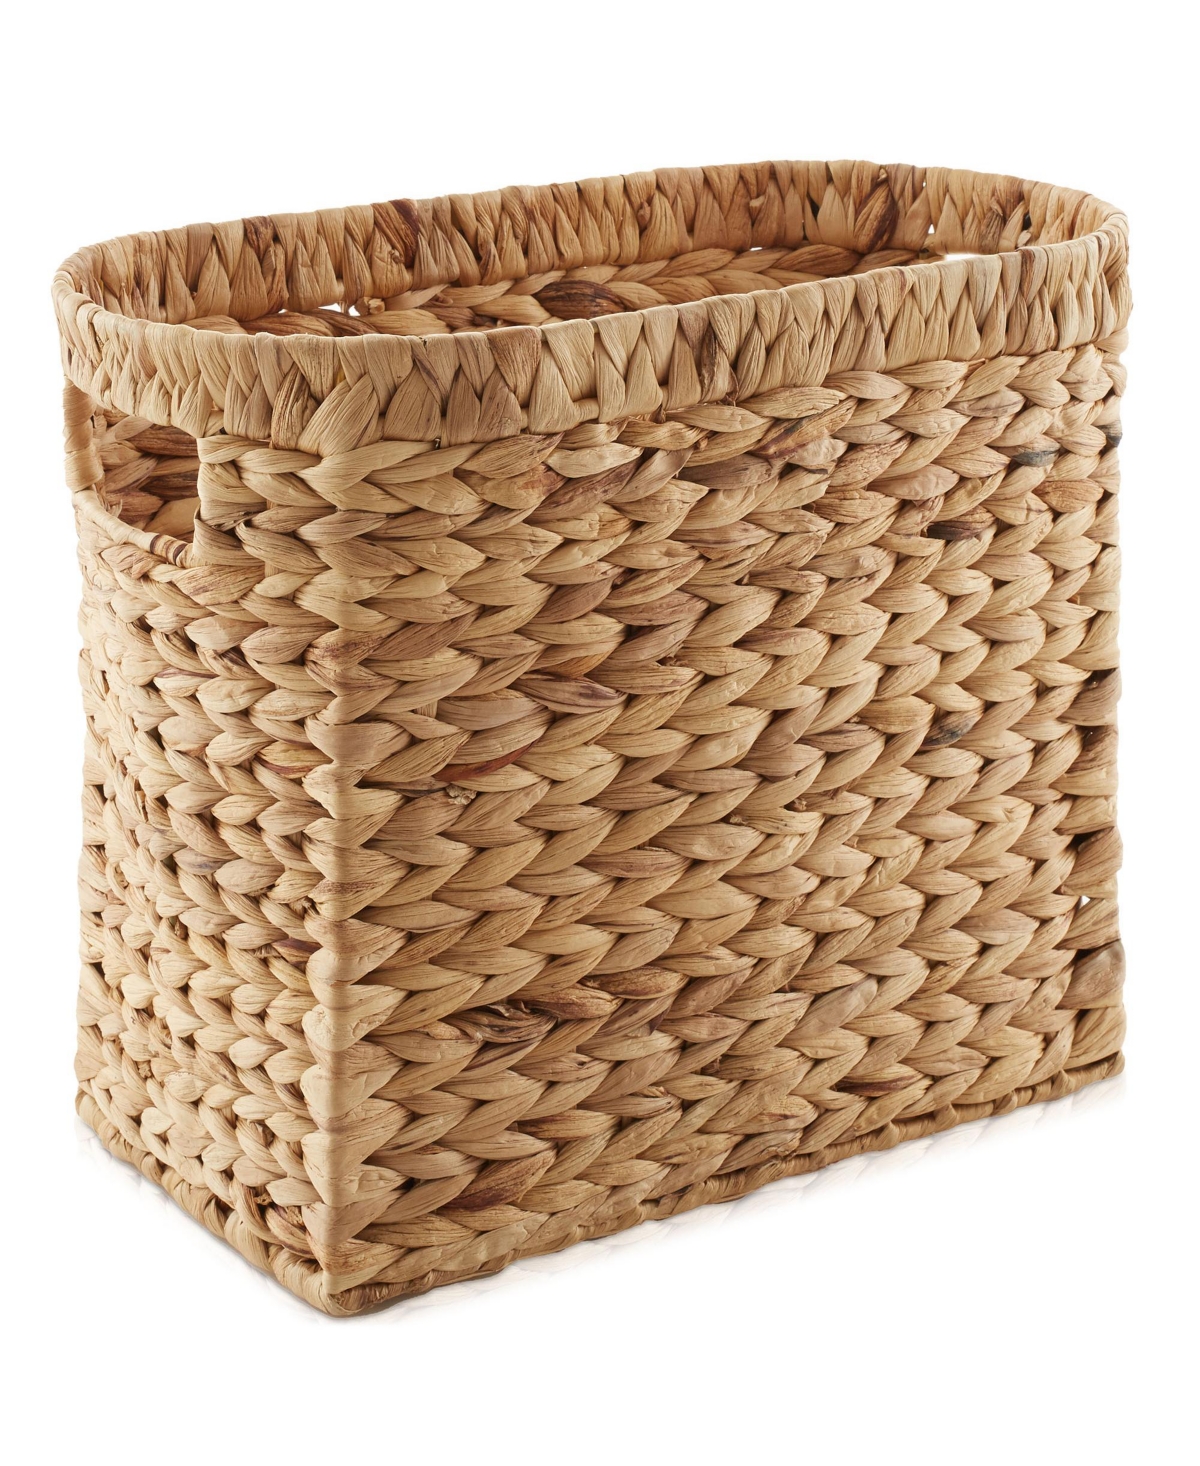 Magazine Holder Basket with Handles, Natural - Oval Water Hyacinth Storage Bin for Bathroom, Home Office - Natural - hyacinth